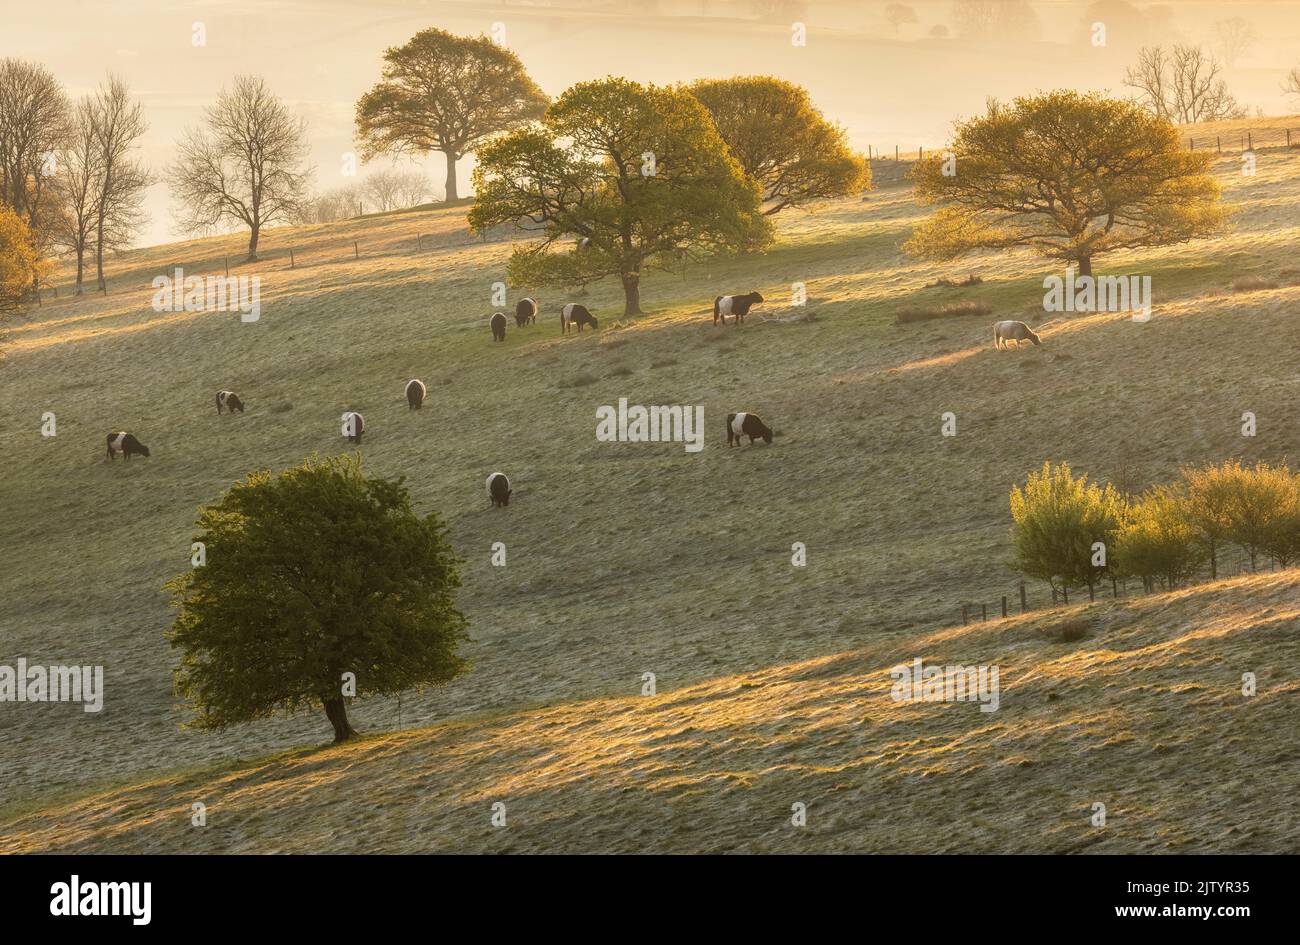 Oak trees (Quercus robur) on downland with belted galloway cattle, Mainden Newton, Dorset, England, UK Stock Photo